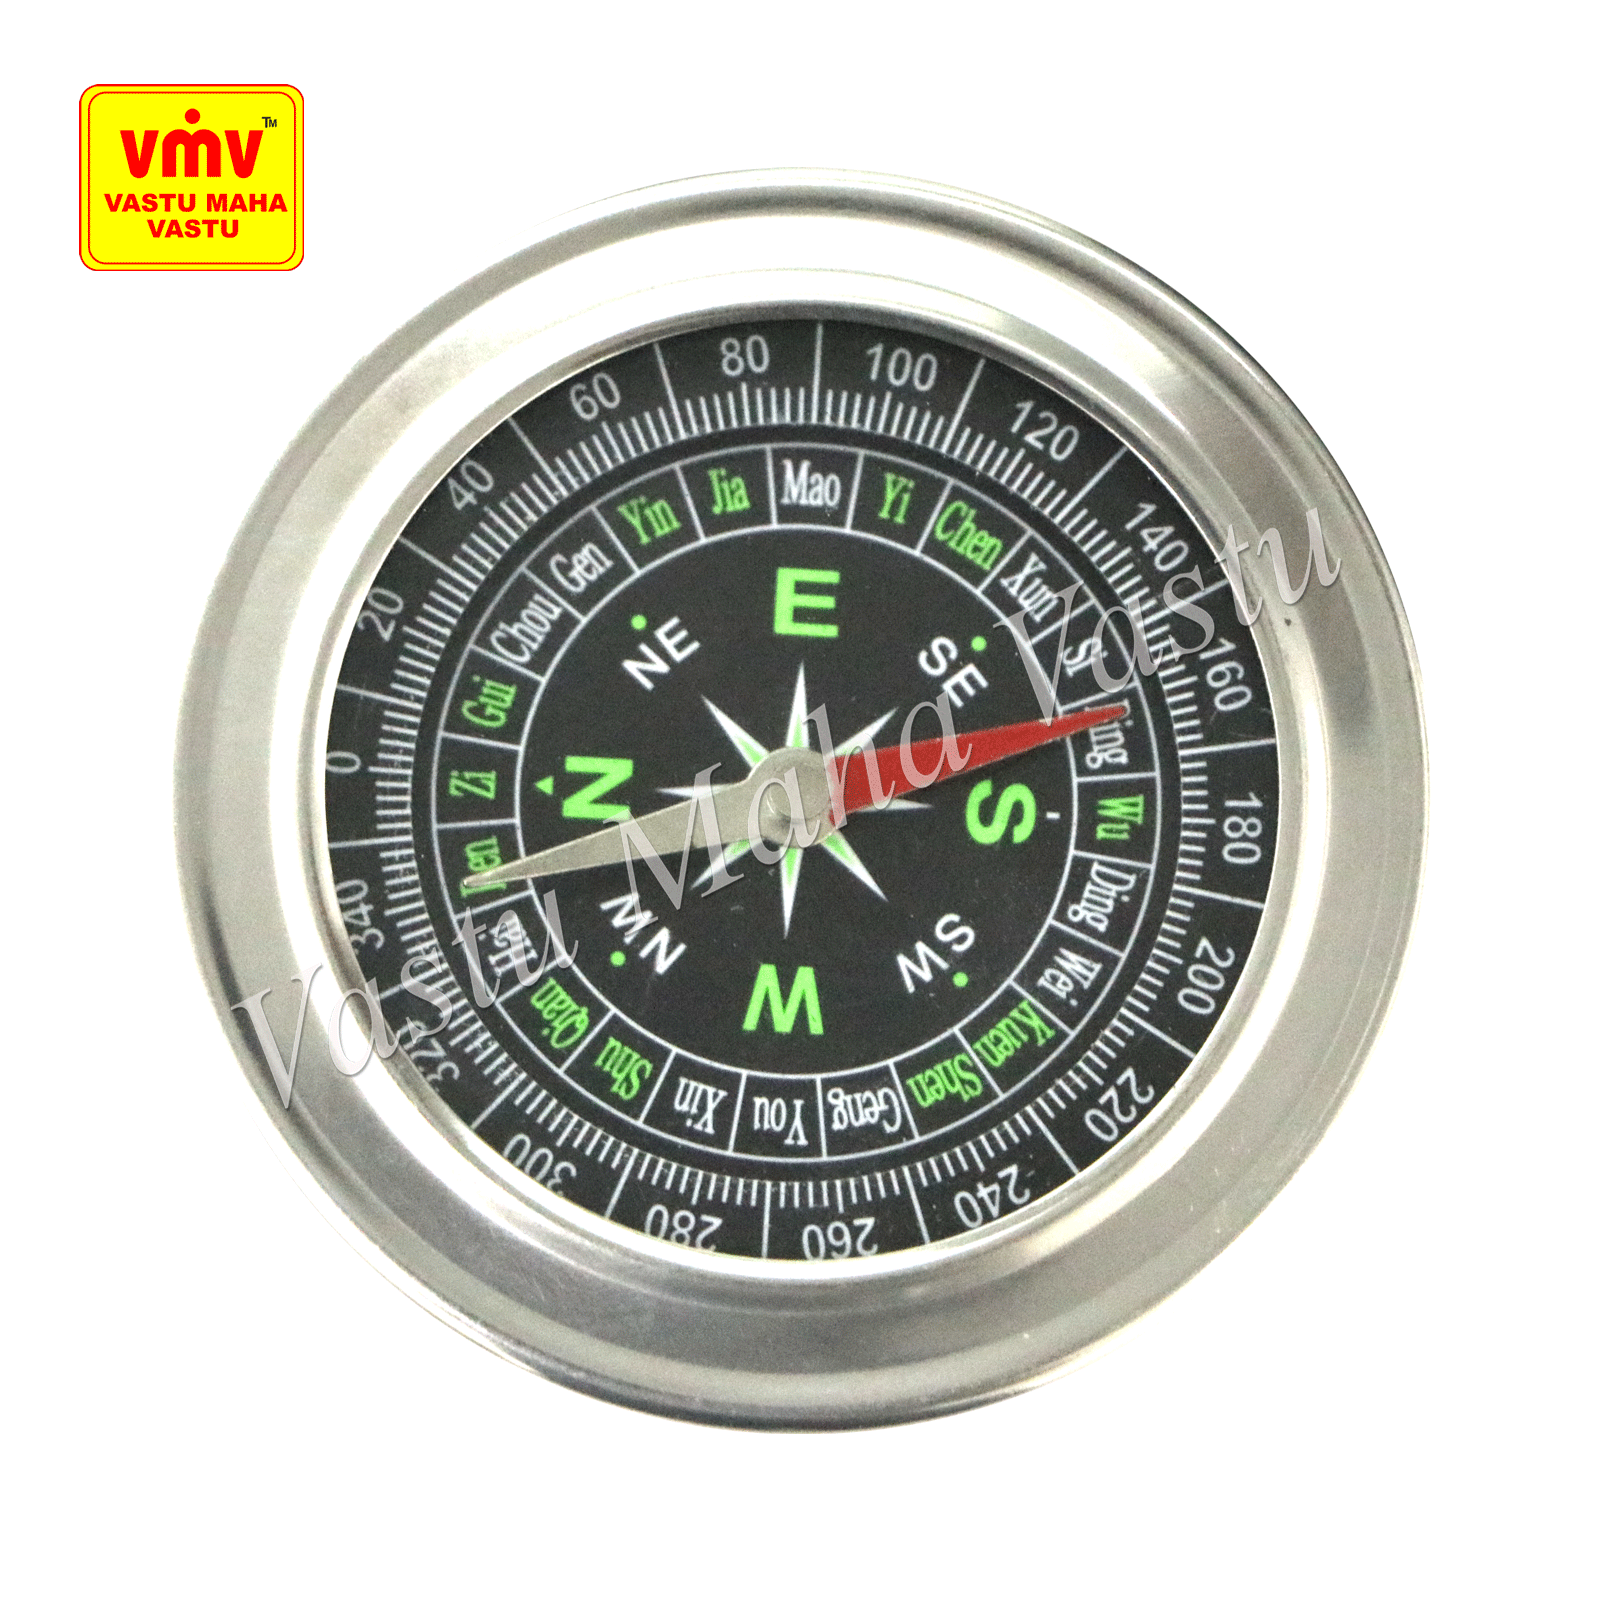   Normal Compass